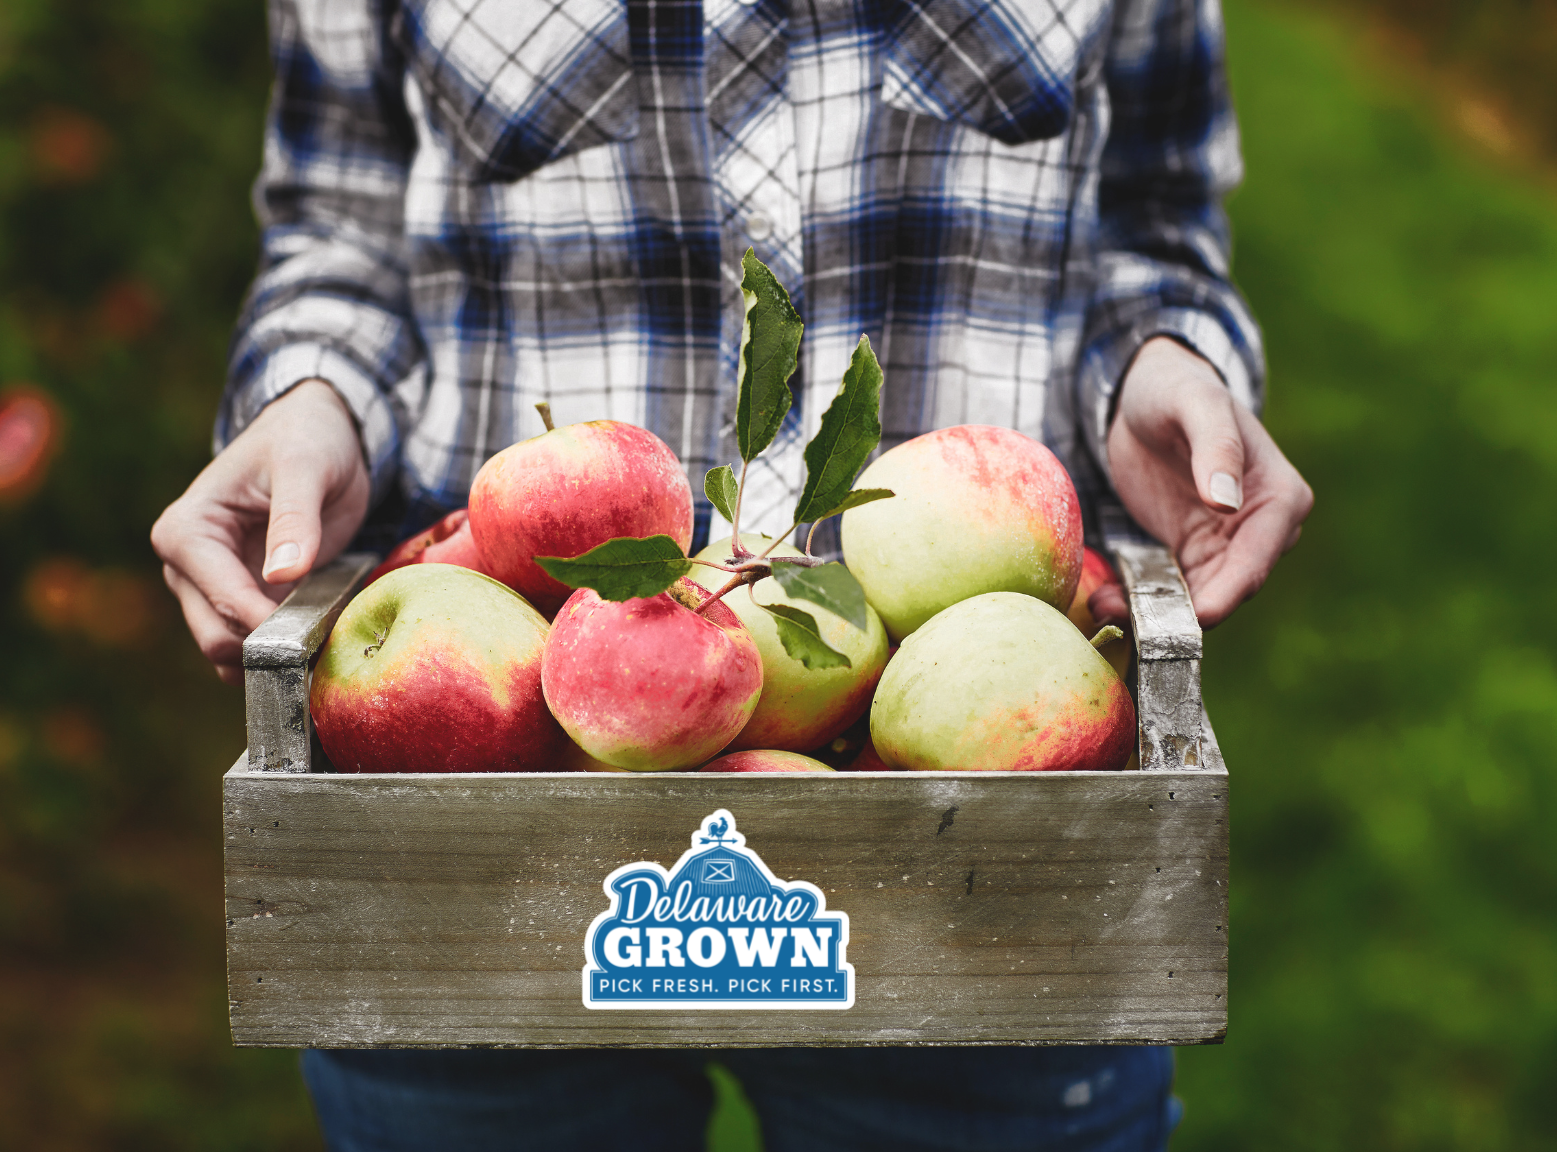 Woman in flannel shirt and jeans holding wooden flat of apples picked in the orchard with Delaware Growl logo on box